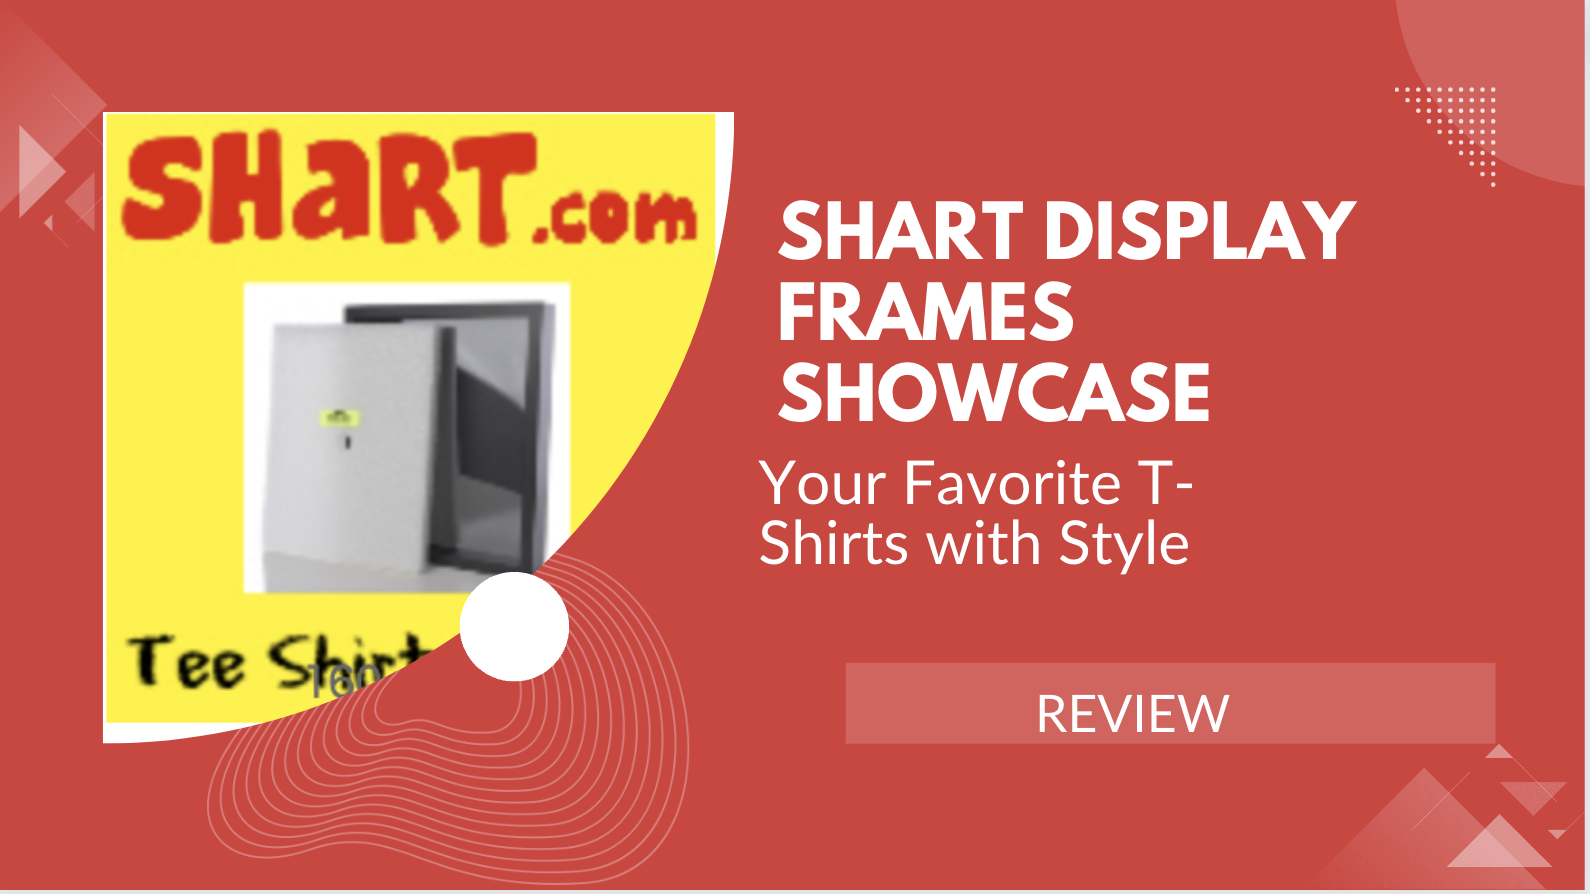 Shart Display Frames Showcase Your Favorite T-Shirts with Style